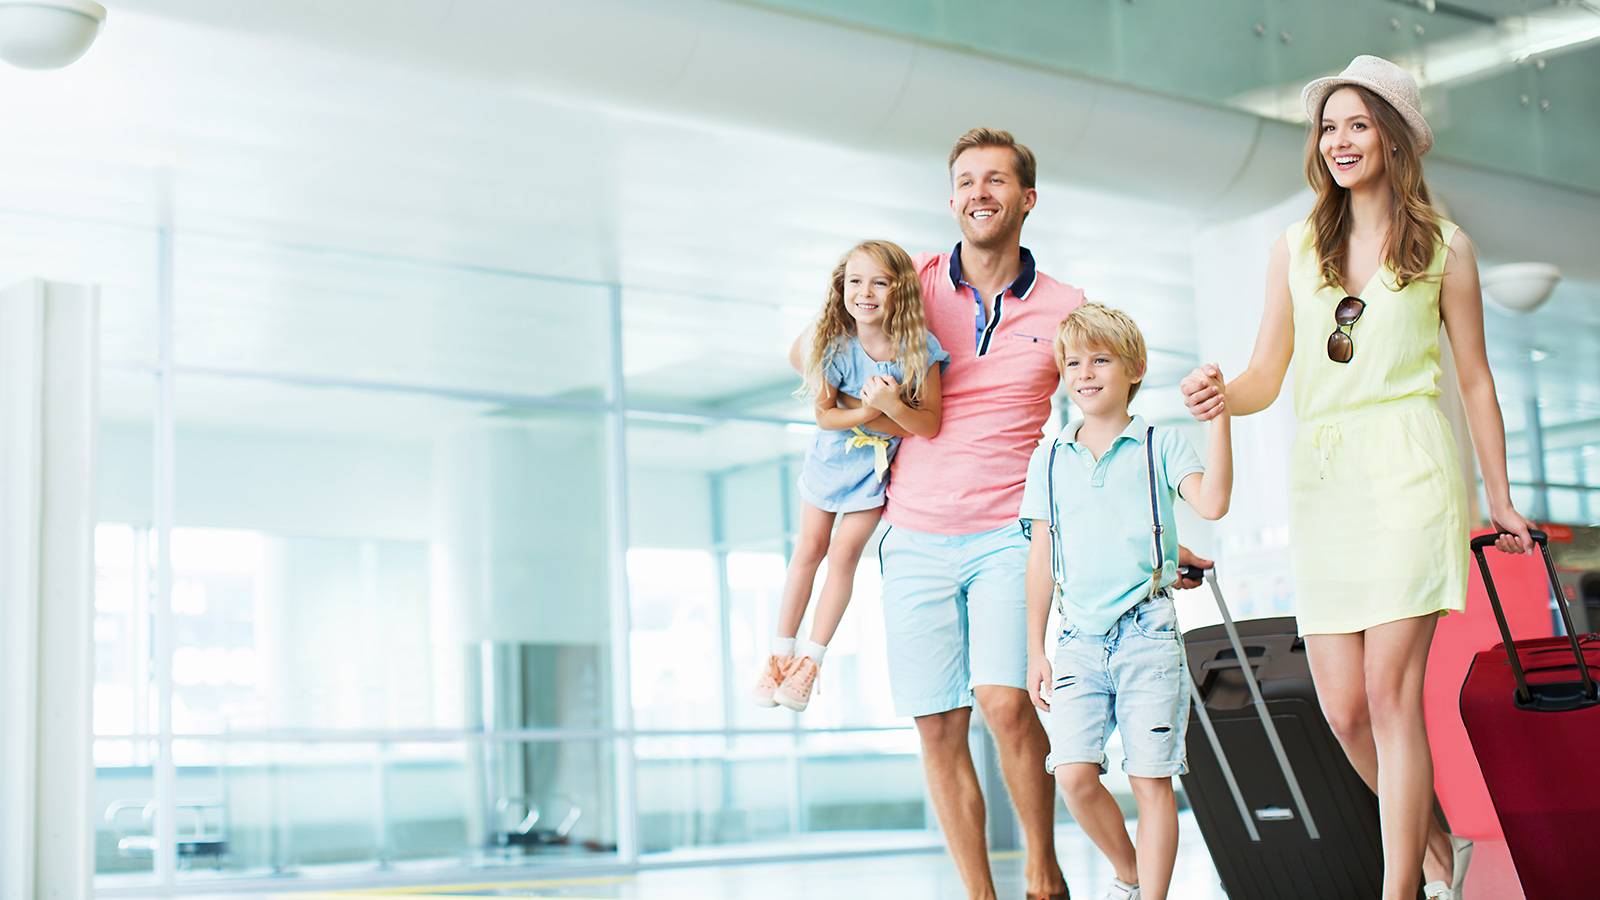 Parents-Best-travel-insurance-for-families-with-young-kids-1